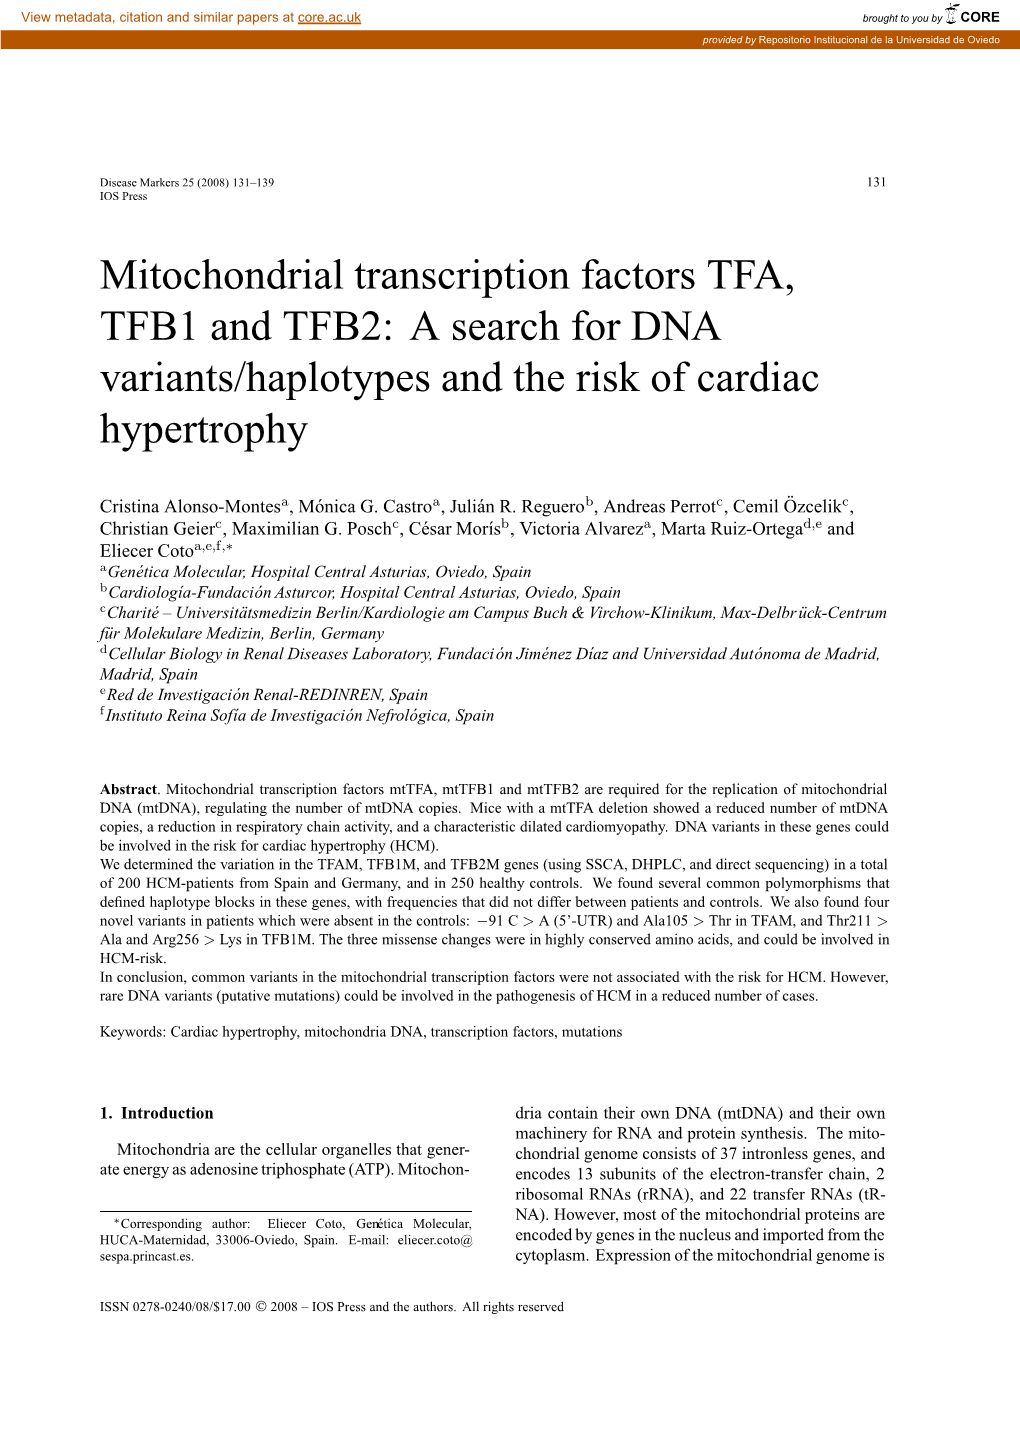 Mitochondrial Transcription Factors TFA, TFB1 and TFB2: a Search for DNA Variants/Haplotypes and the Risk of Cardiac Hypertrophy